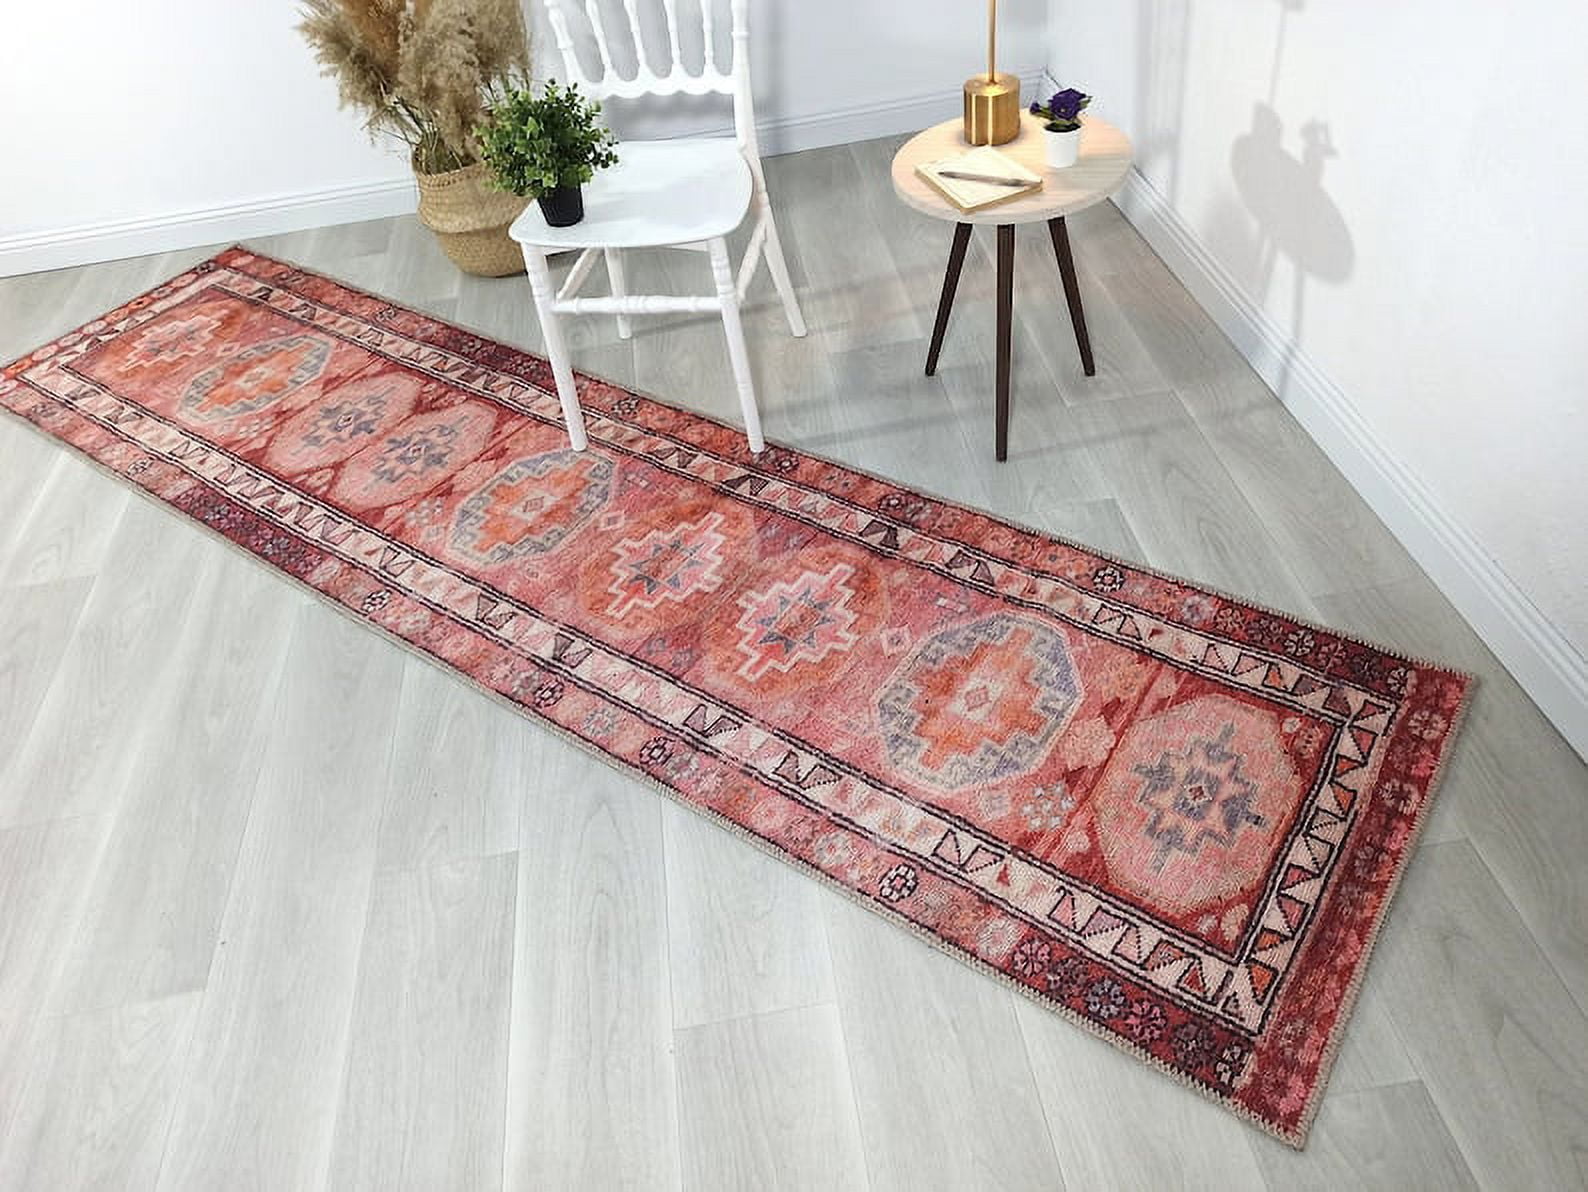 High-Quality tapis salon For High-Traffic Areas 